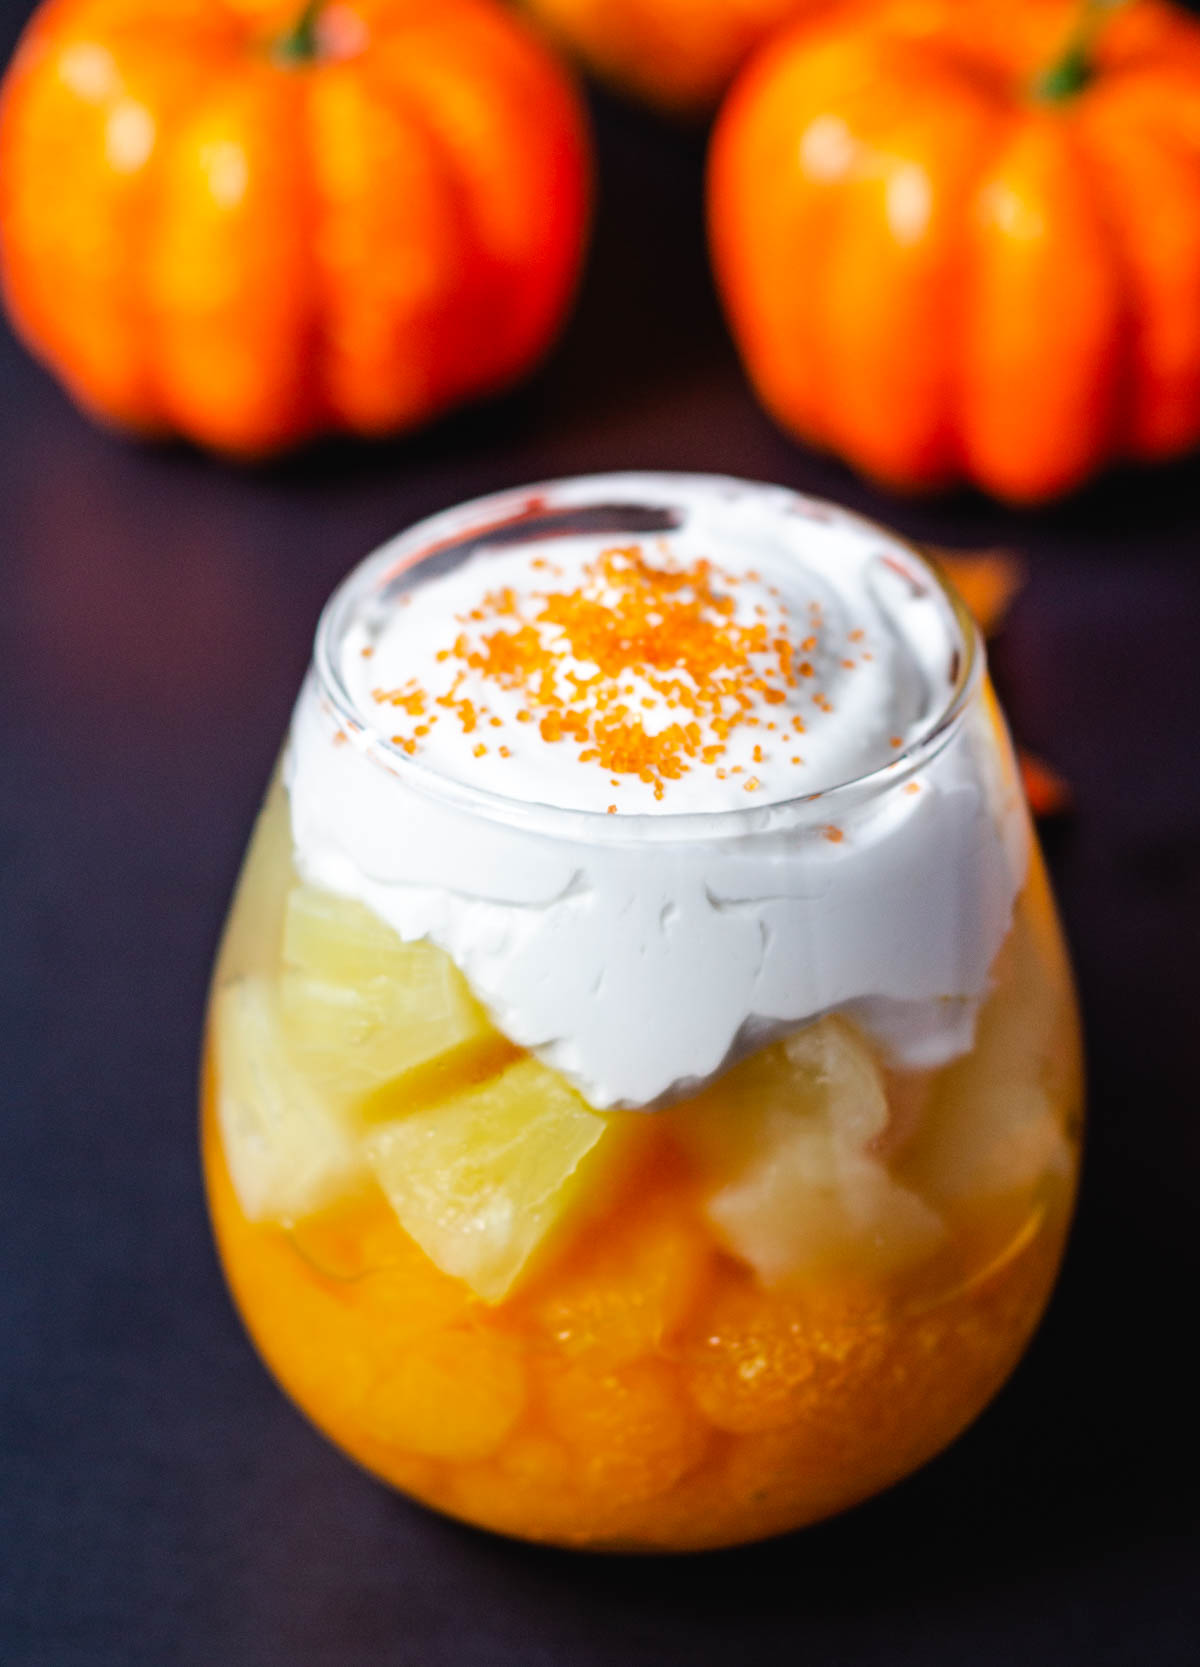 Fruit cups with oranges and pineapple topped with whipped cream.